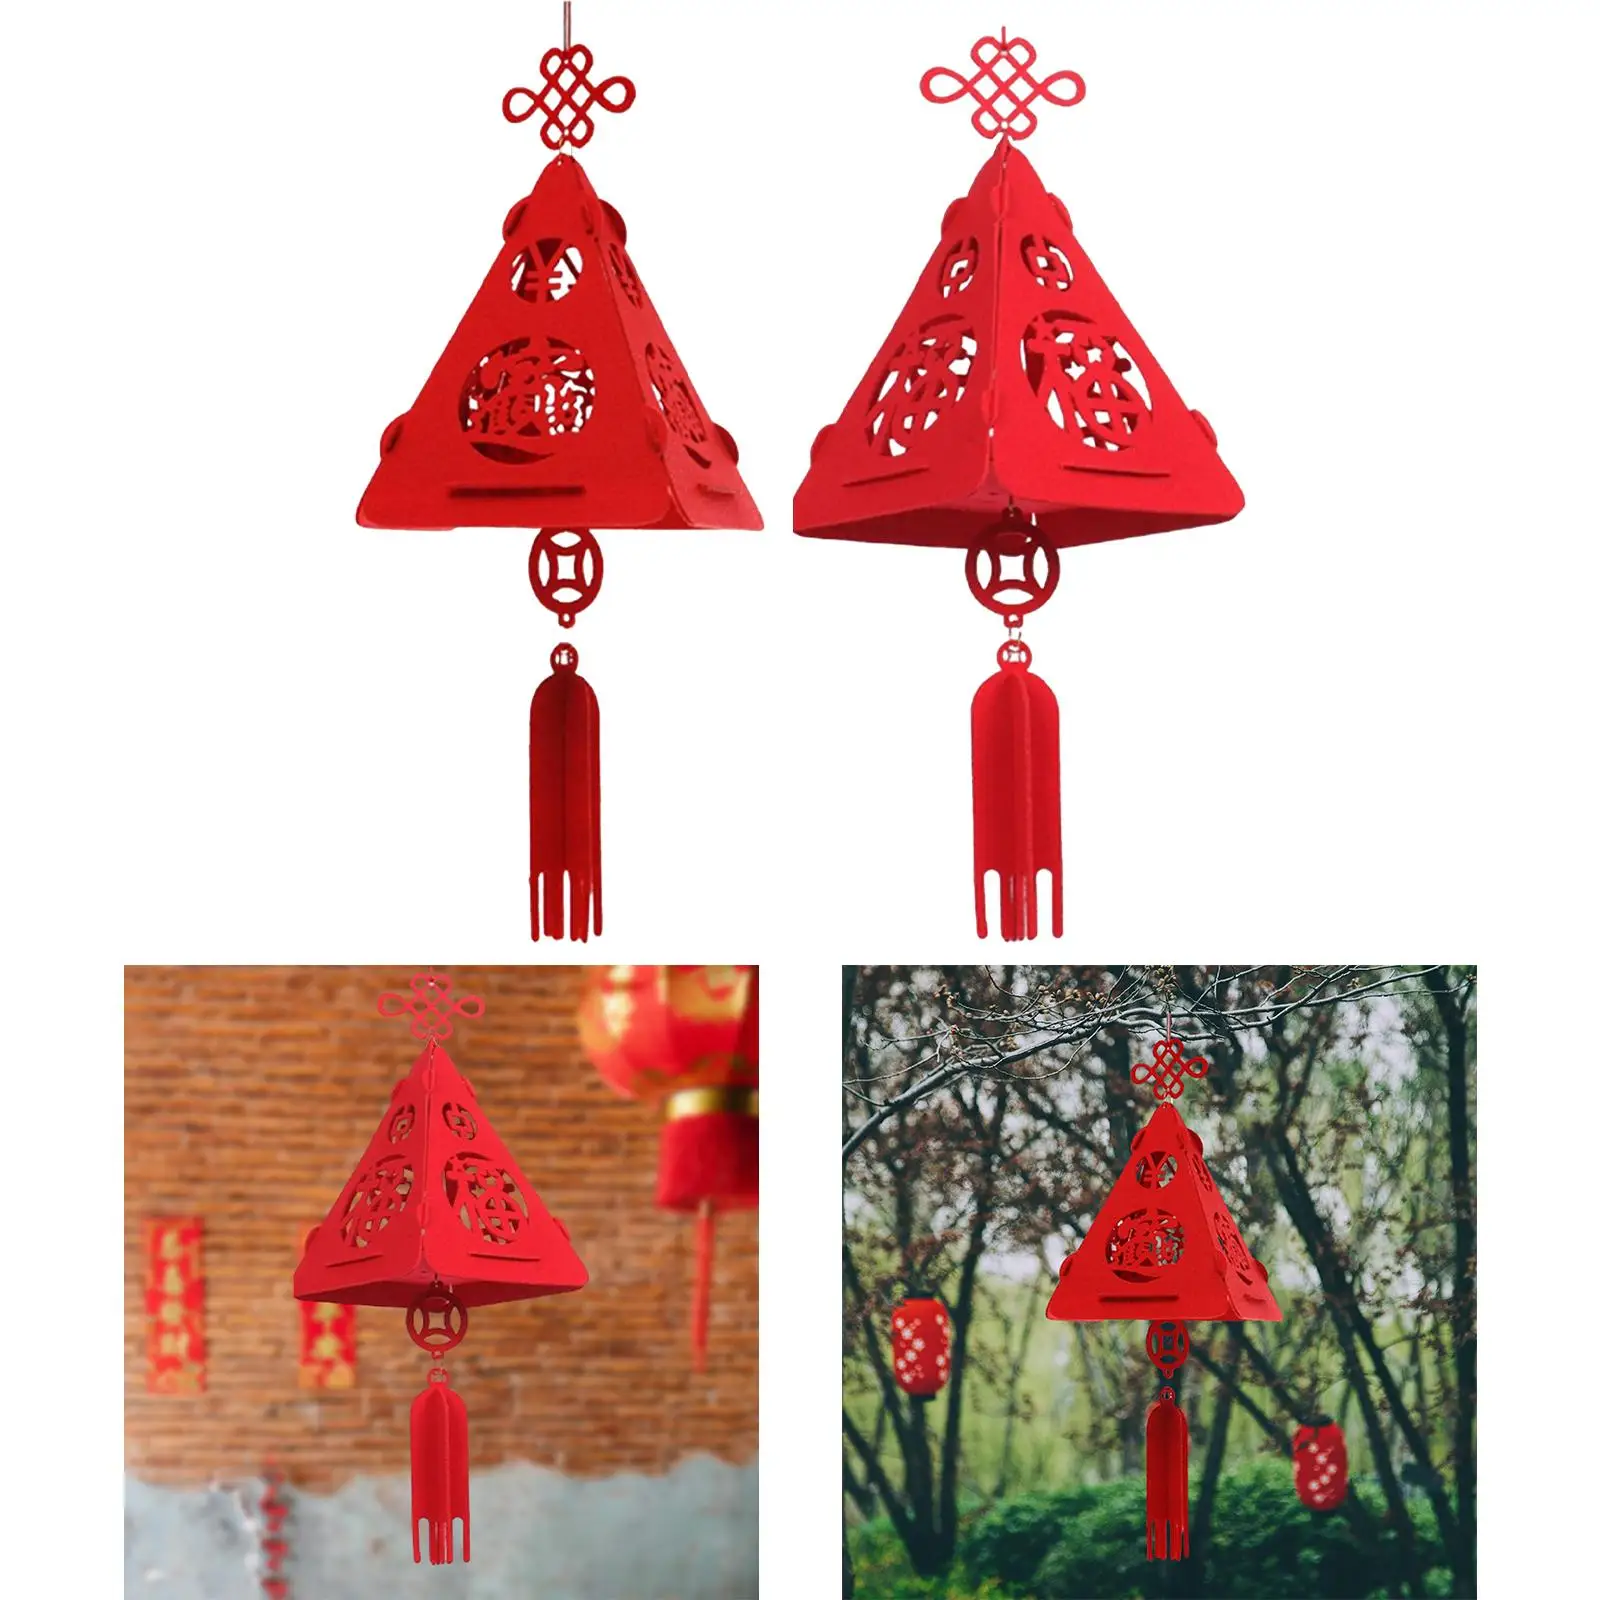 Chinese Lantern Lucky 3D Lantern Decorative for Festival Blessing Hanging Decor